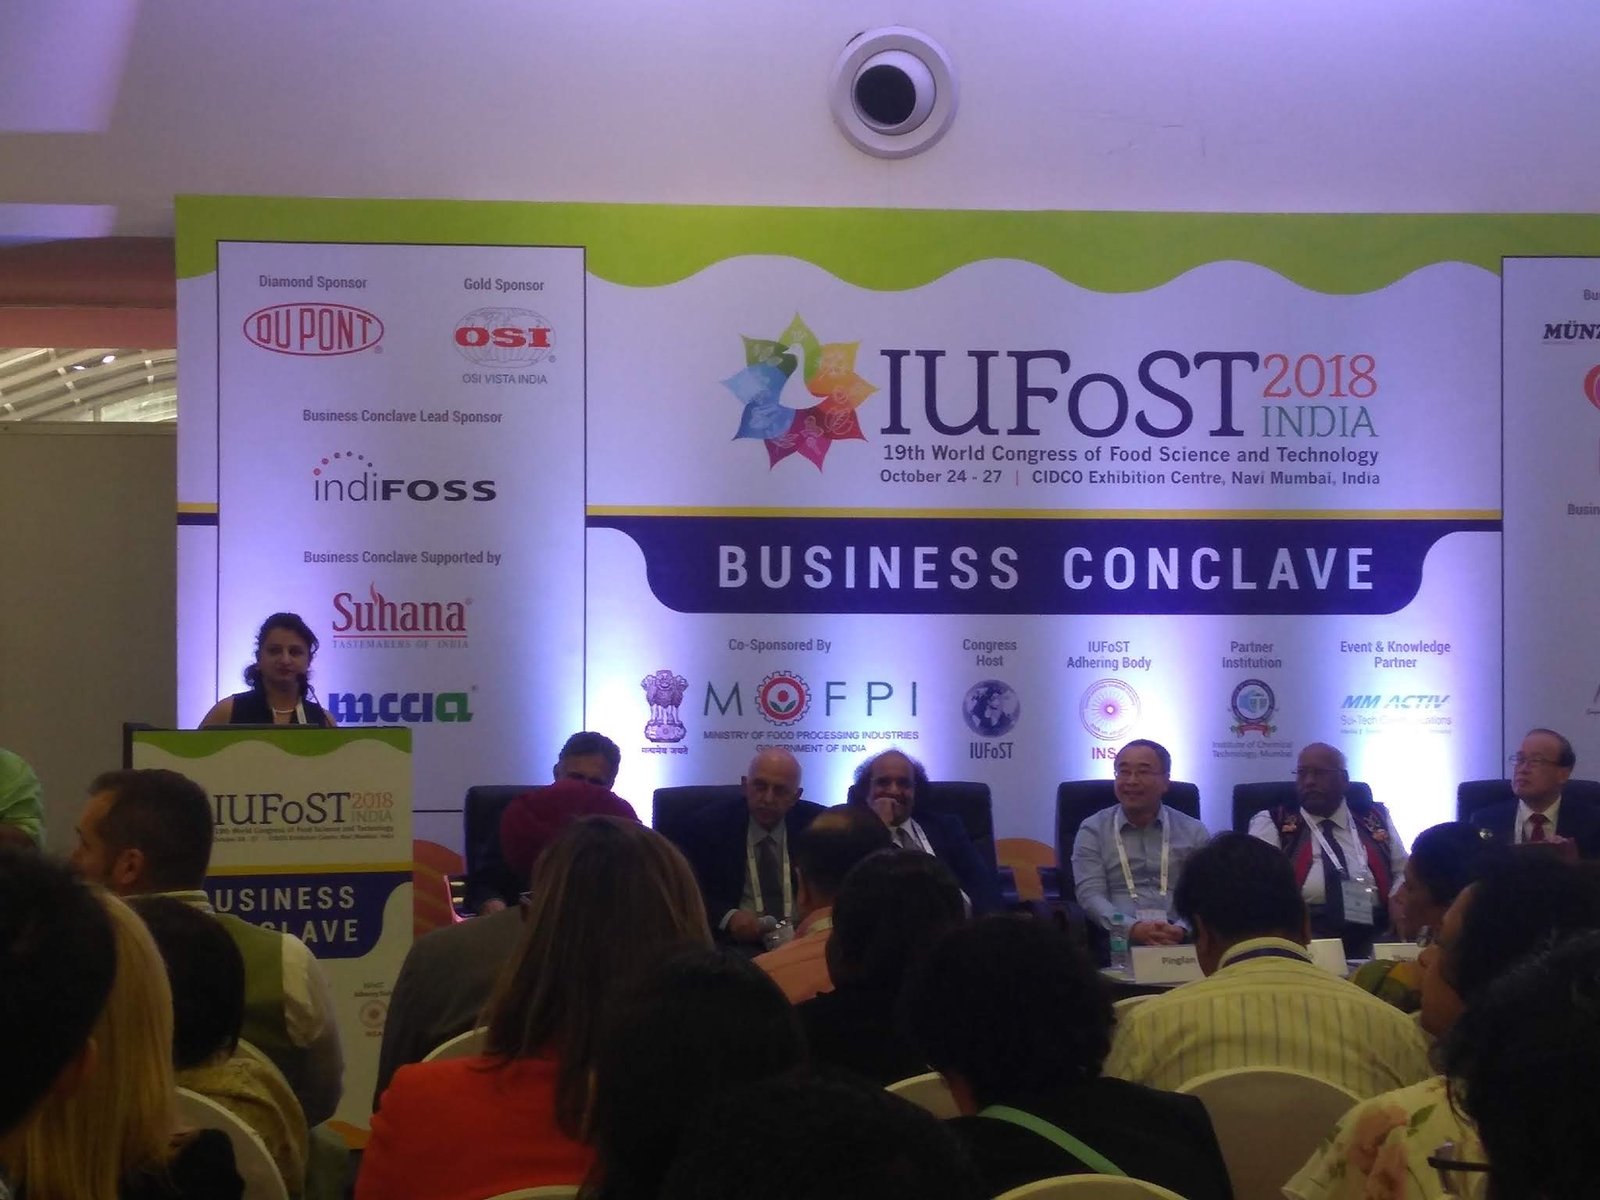 business-conclave-starts-with-a-bang-at-iufost-2018